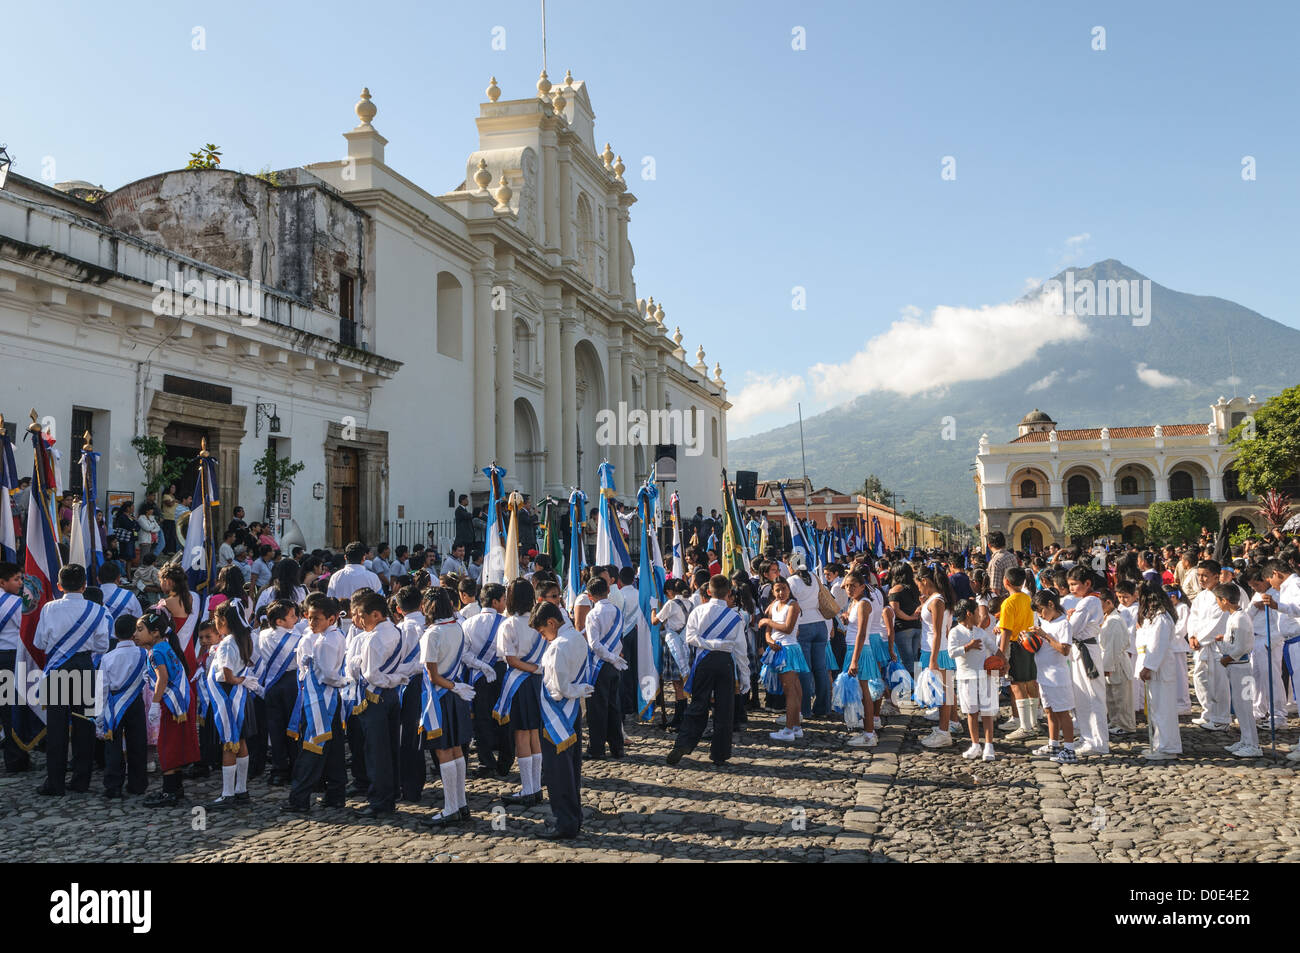 ANTIGUA, Guatemala - During the morning on the day before Guatemalan Independence Day (which is celebrated on September 15), hundreds of school children from Antigua and the surrounding villages march in a parade of school groups in Antigua, some in costumes and others in their school uniforms. The parade includes school marching bands and cheerleaders as well. The procession starts at Parque Central and weaves its way past the bright yellow La Merced church and onto the municipal stadium. Stock Photo